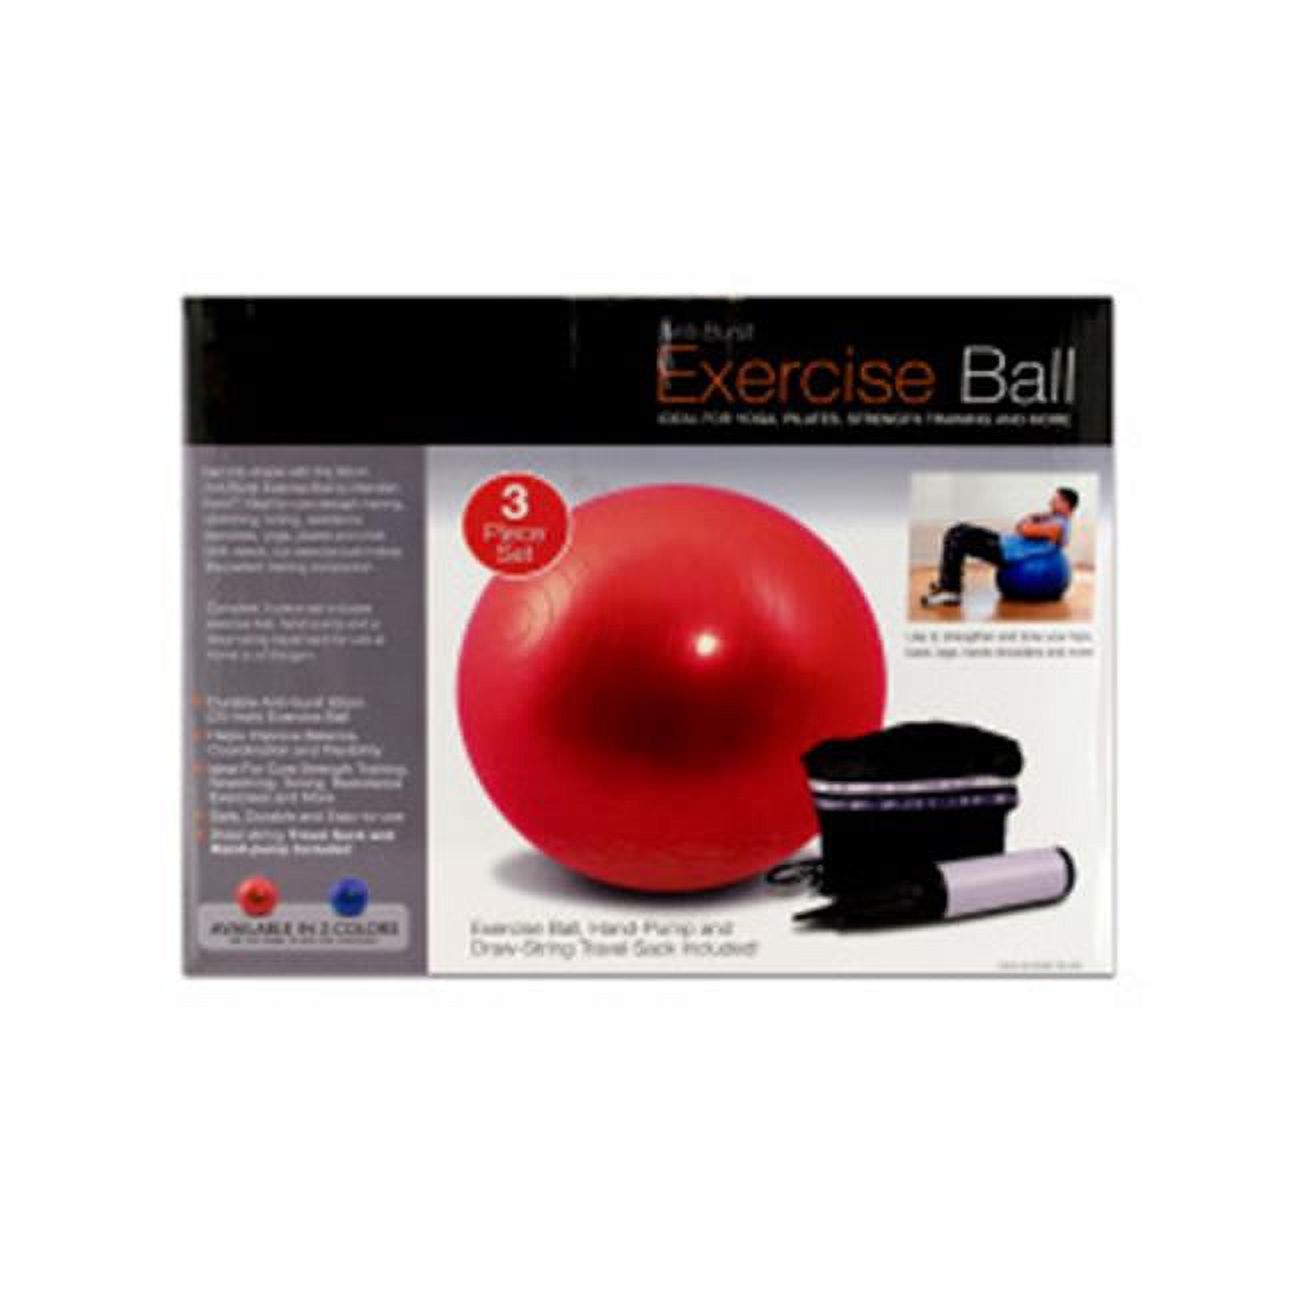 Bulk Buys OB350-1 25'' Plastic Rubber Exercise Ball with Pump - Pack of 1 - image 1 of 2